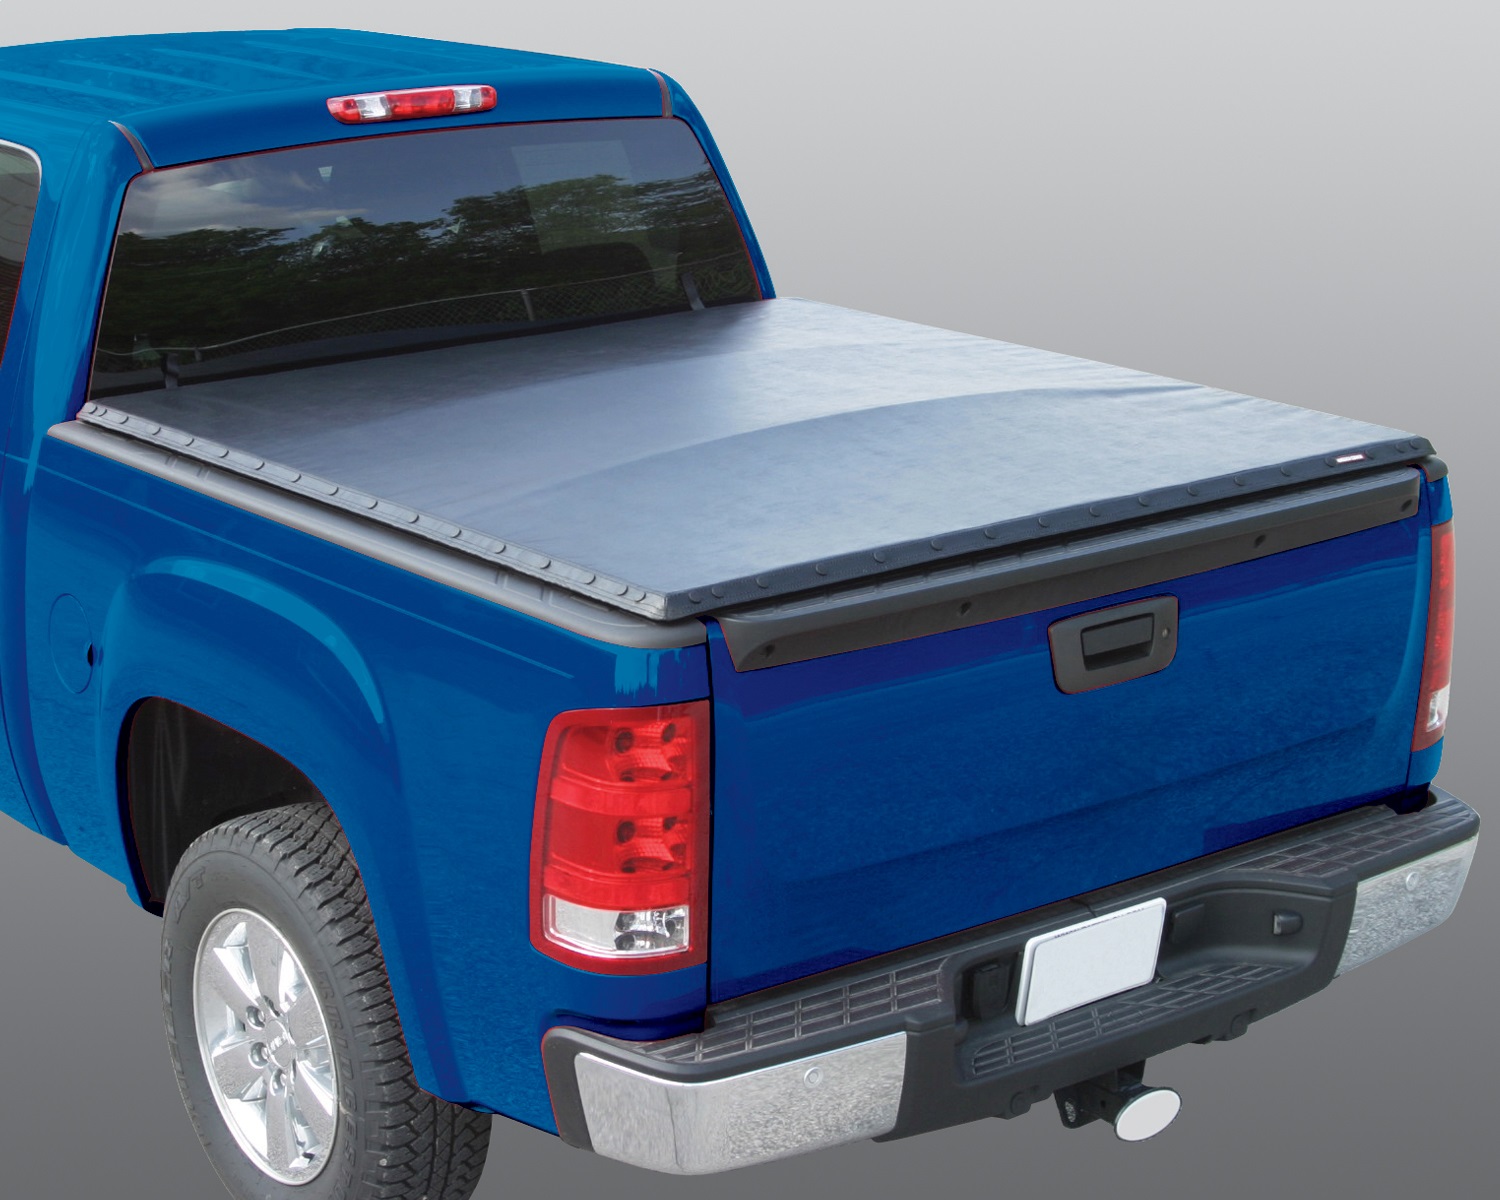 Rugged Liner Rugged Liner SN-CC604 Rugged Cover; Tonneau Cover Fits 04-13 Canyon Colorado